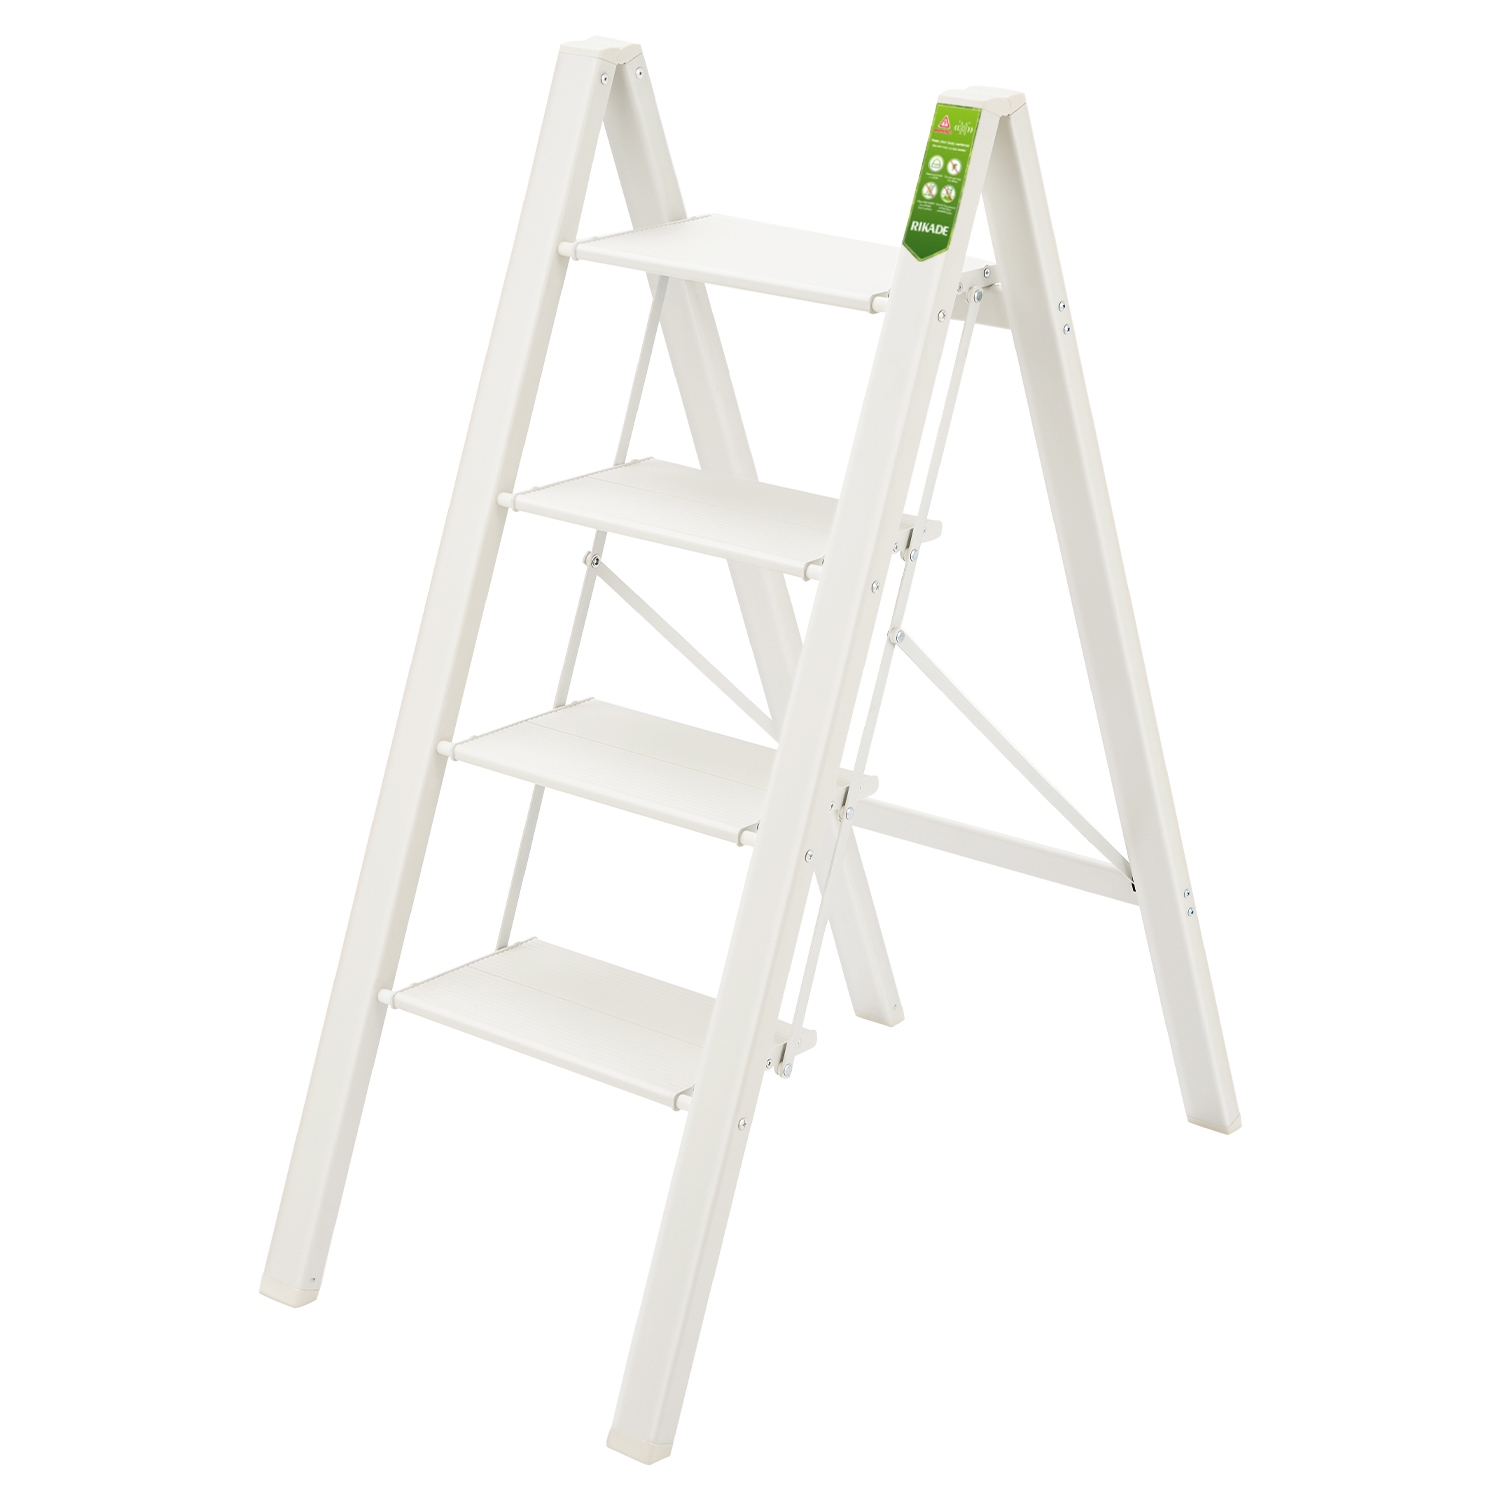 4 Step Ladder, CoolHut Folding Step Stool with Wide Anti-Slip Pedal, Aluminum Portable Lightweight Ladder for Home and Office Use, Kitchen Step Stool 330lb Capacity